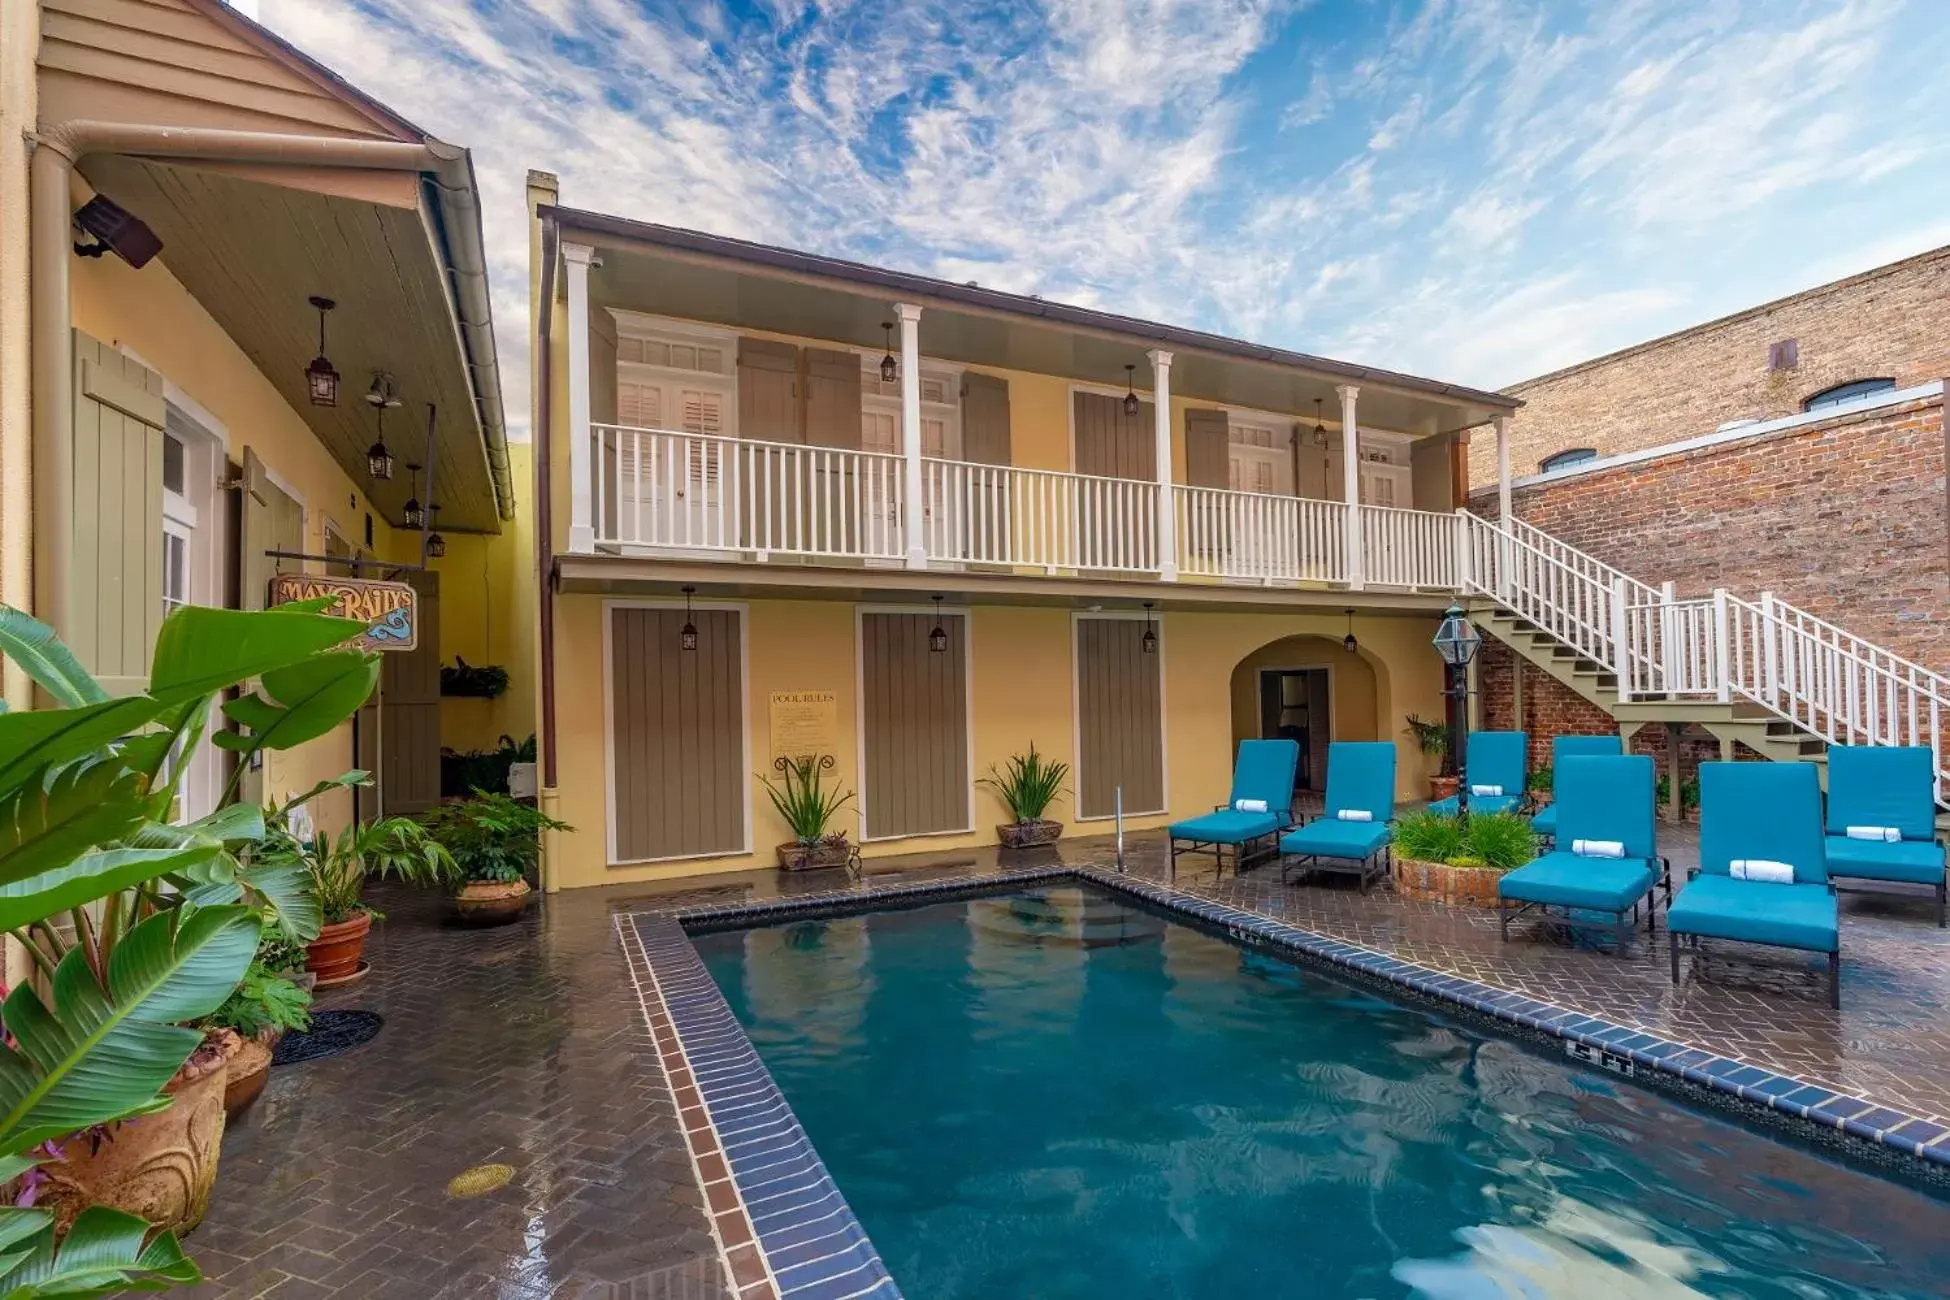 Swimming pool, Property Building in Dauphine Orleans Hotel